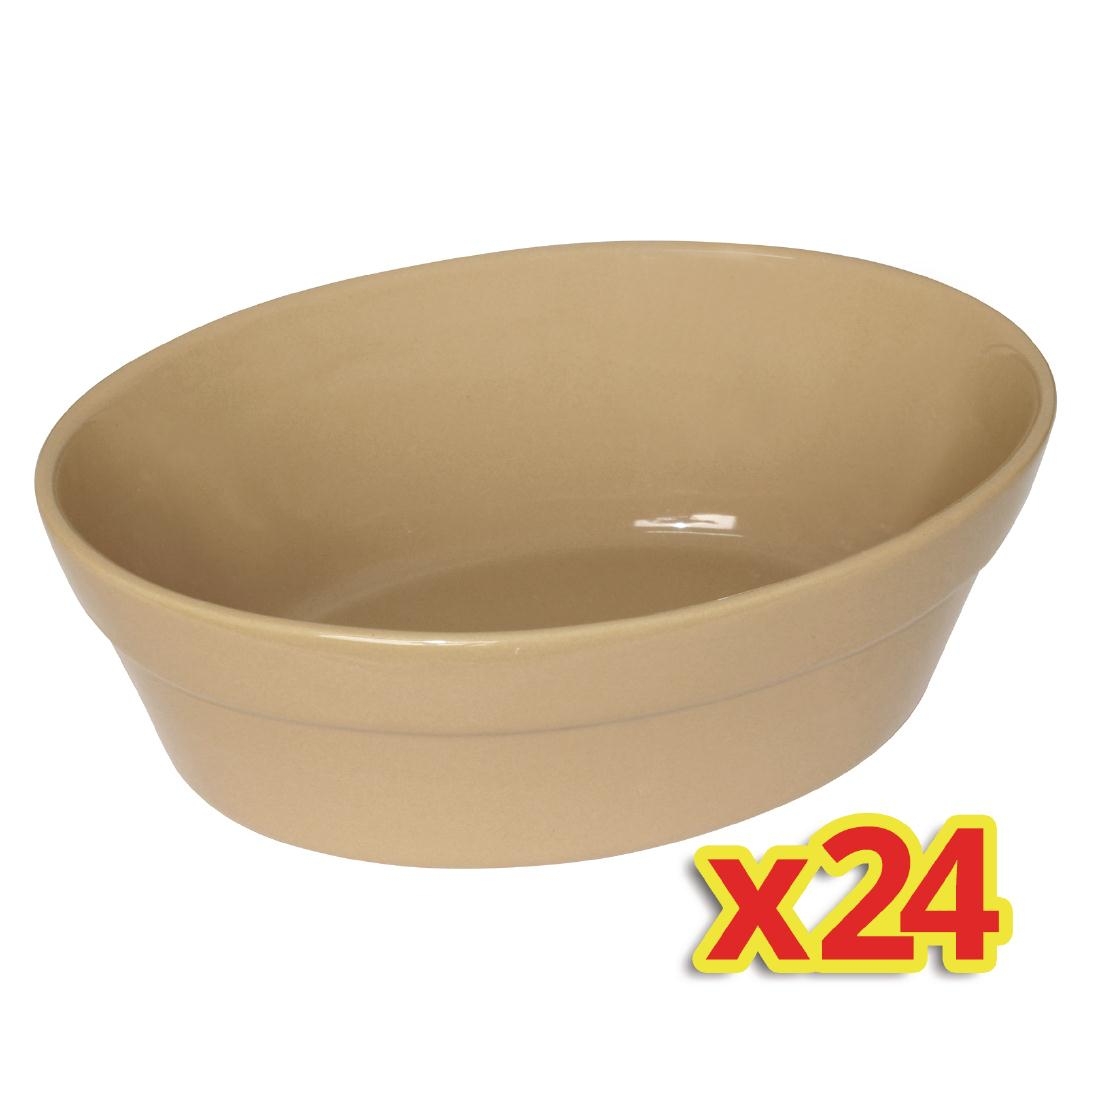 Special Offer - 4x Box of 6 Olympia Oval Pie Bowls Large